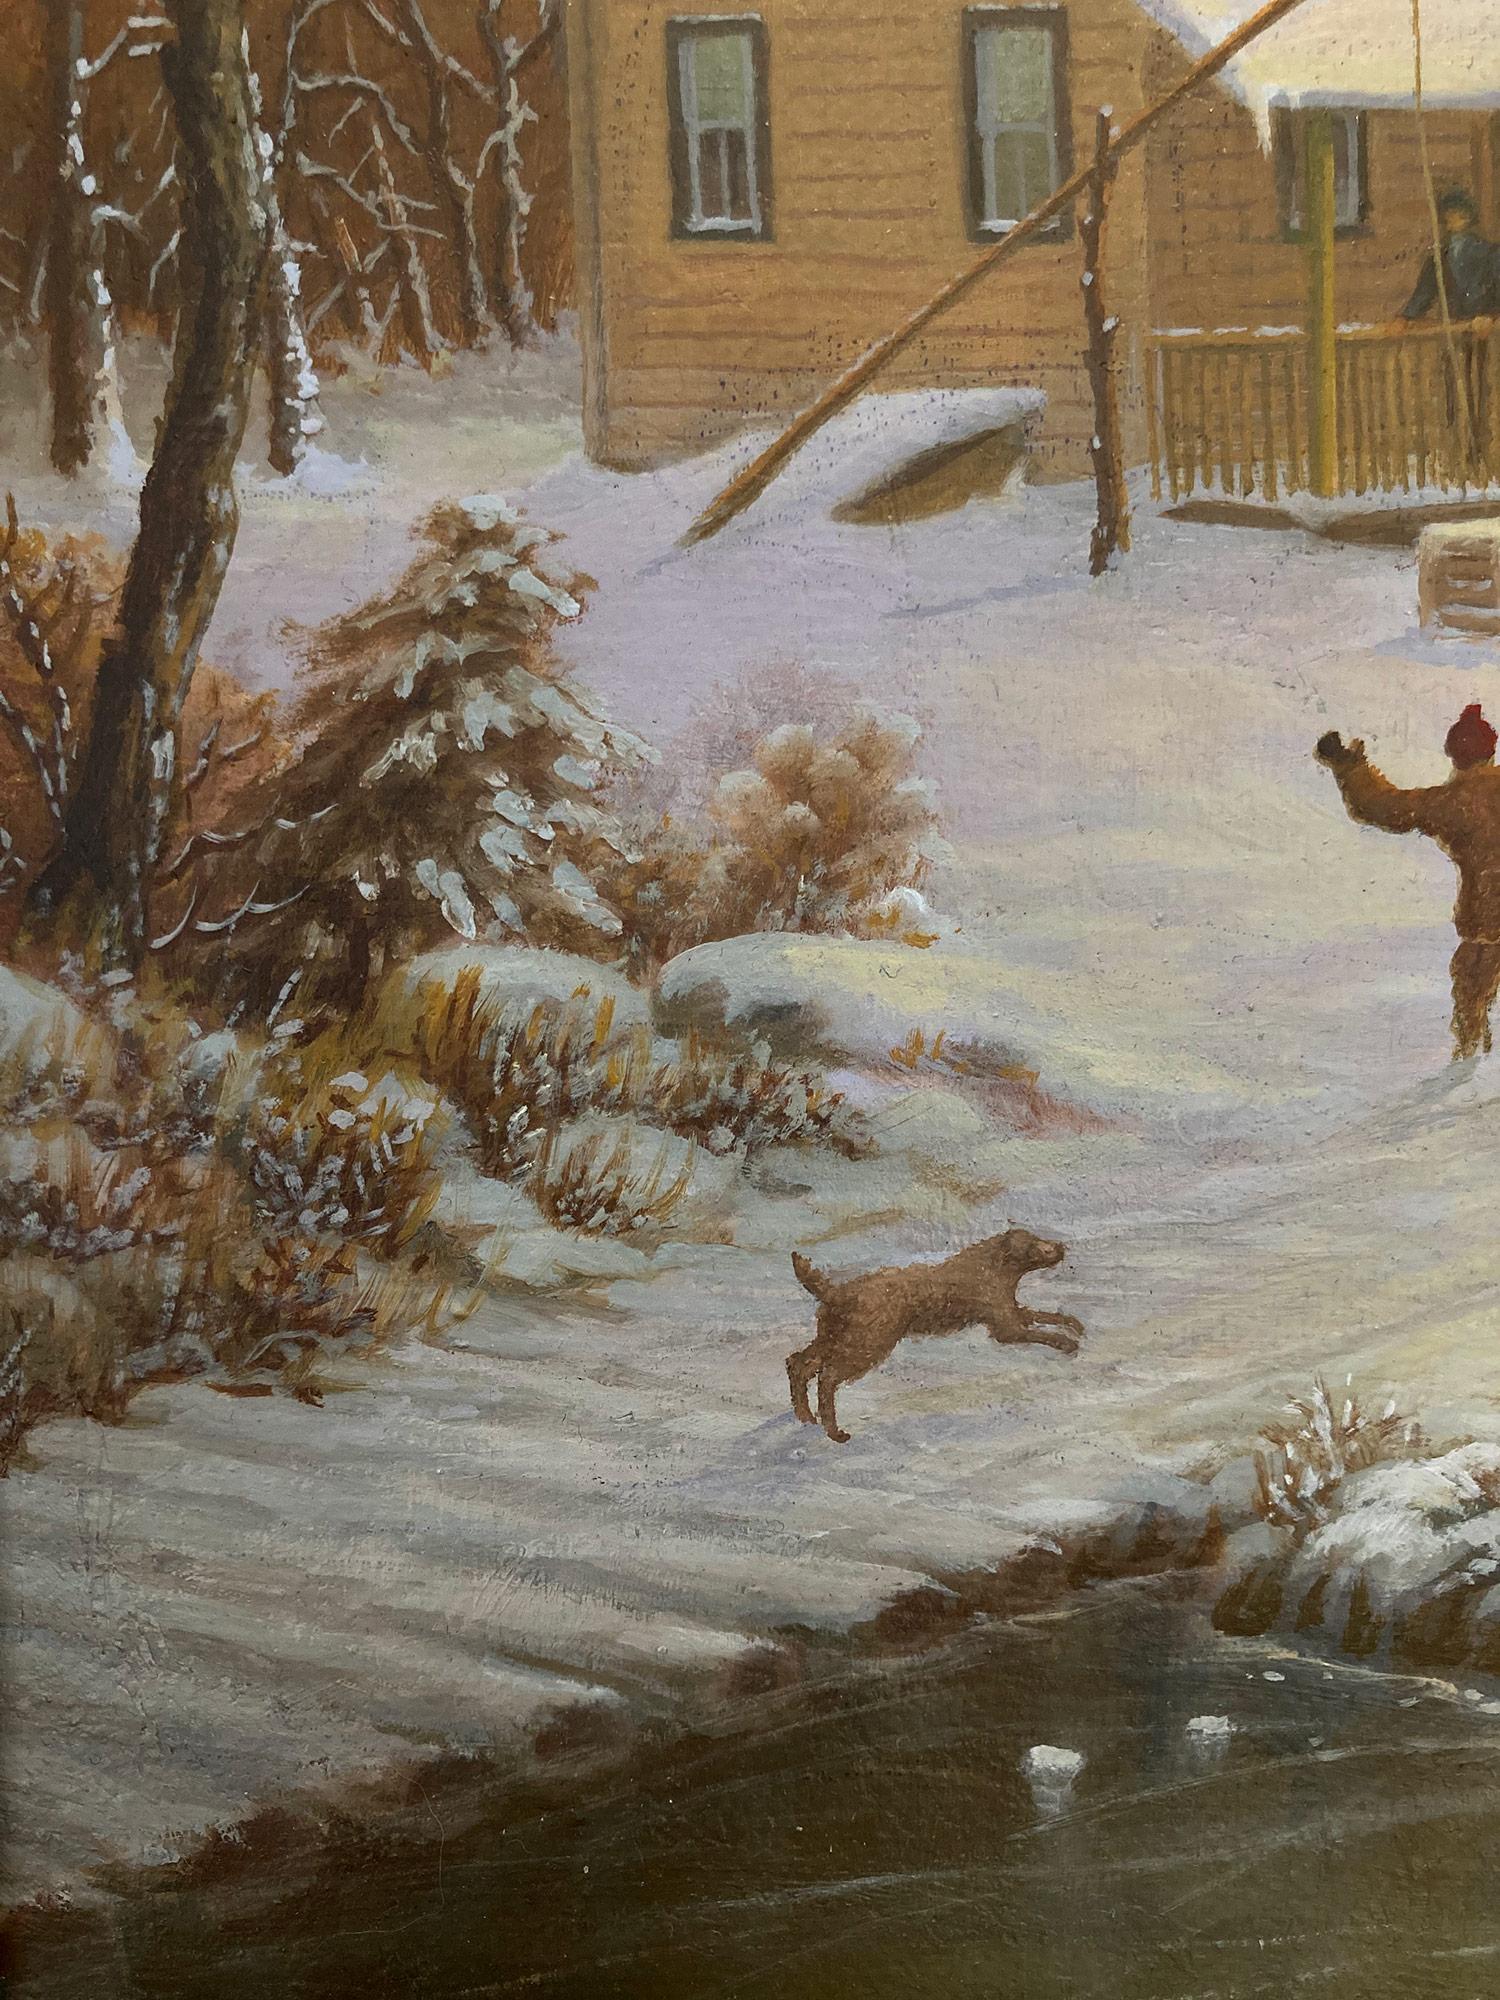 A quaint depiction of Figures in the snow by the Cabin in the Country. Nemethy uses fine detailed techniques with wonderful impressions. We can feel the warmth of the piece with unique colors from the North East, and the atmosphere is set